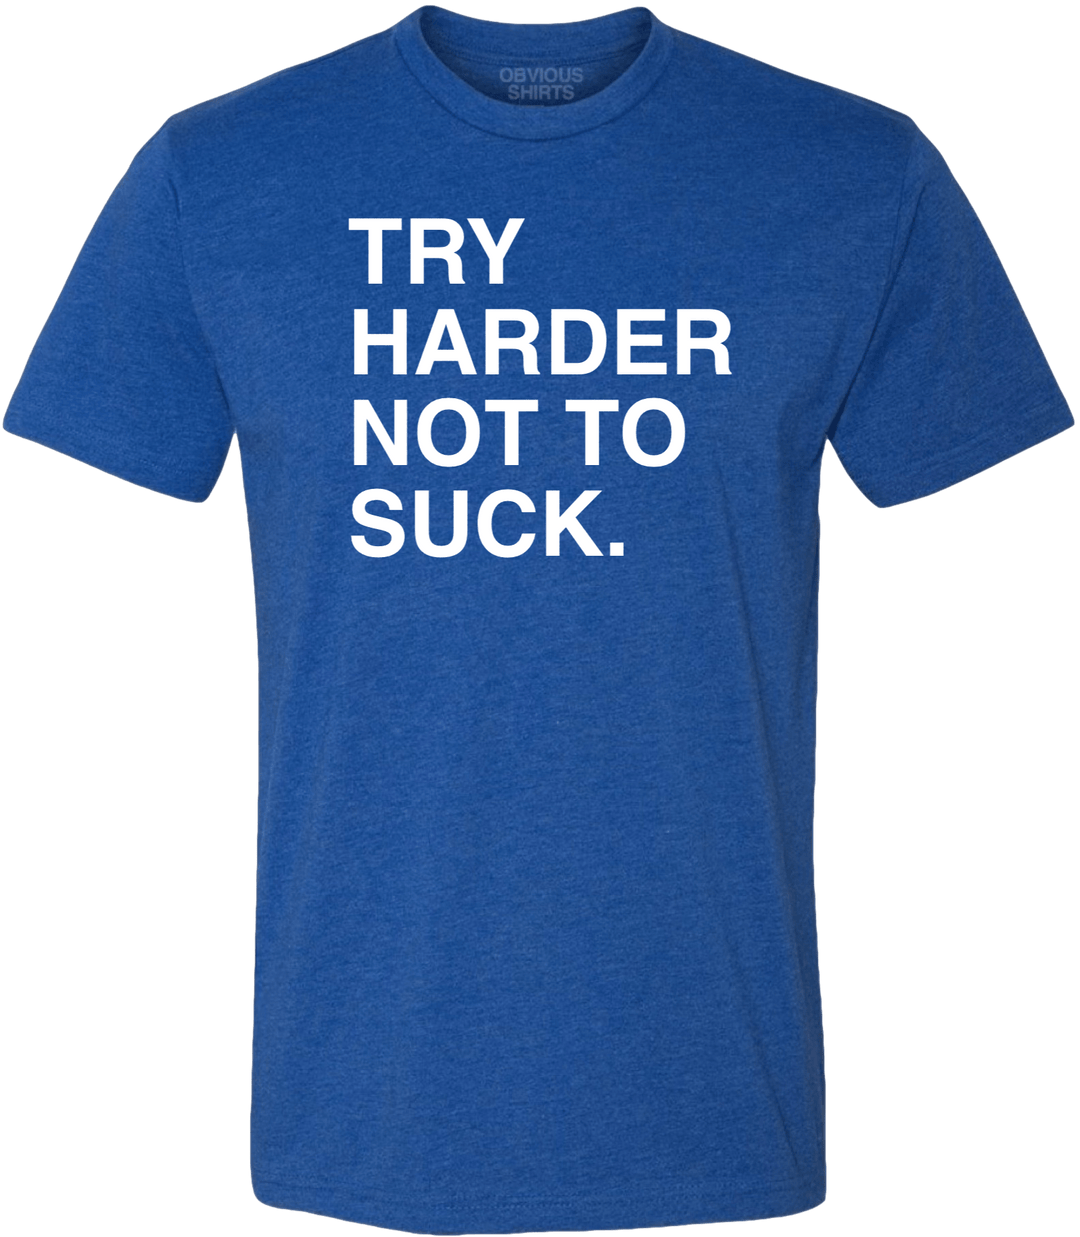 TRY HARDER NOT TO SUCK. - OBVIOUS SHIRTS